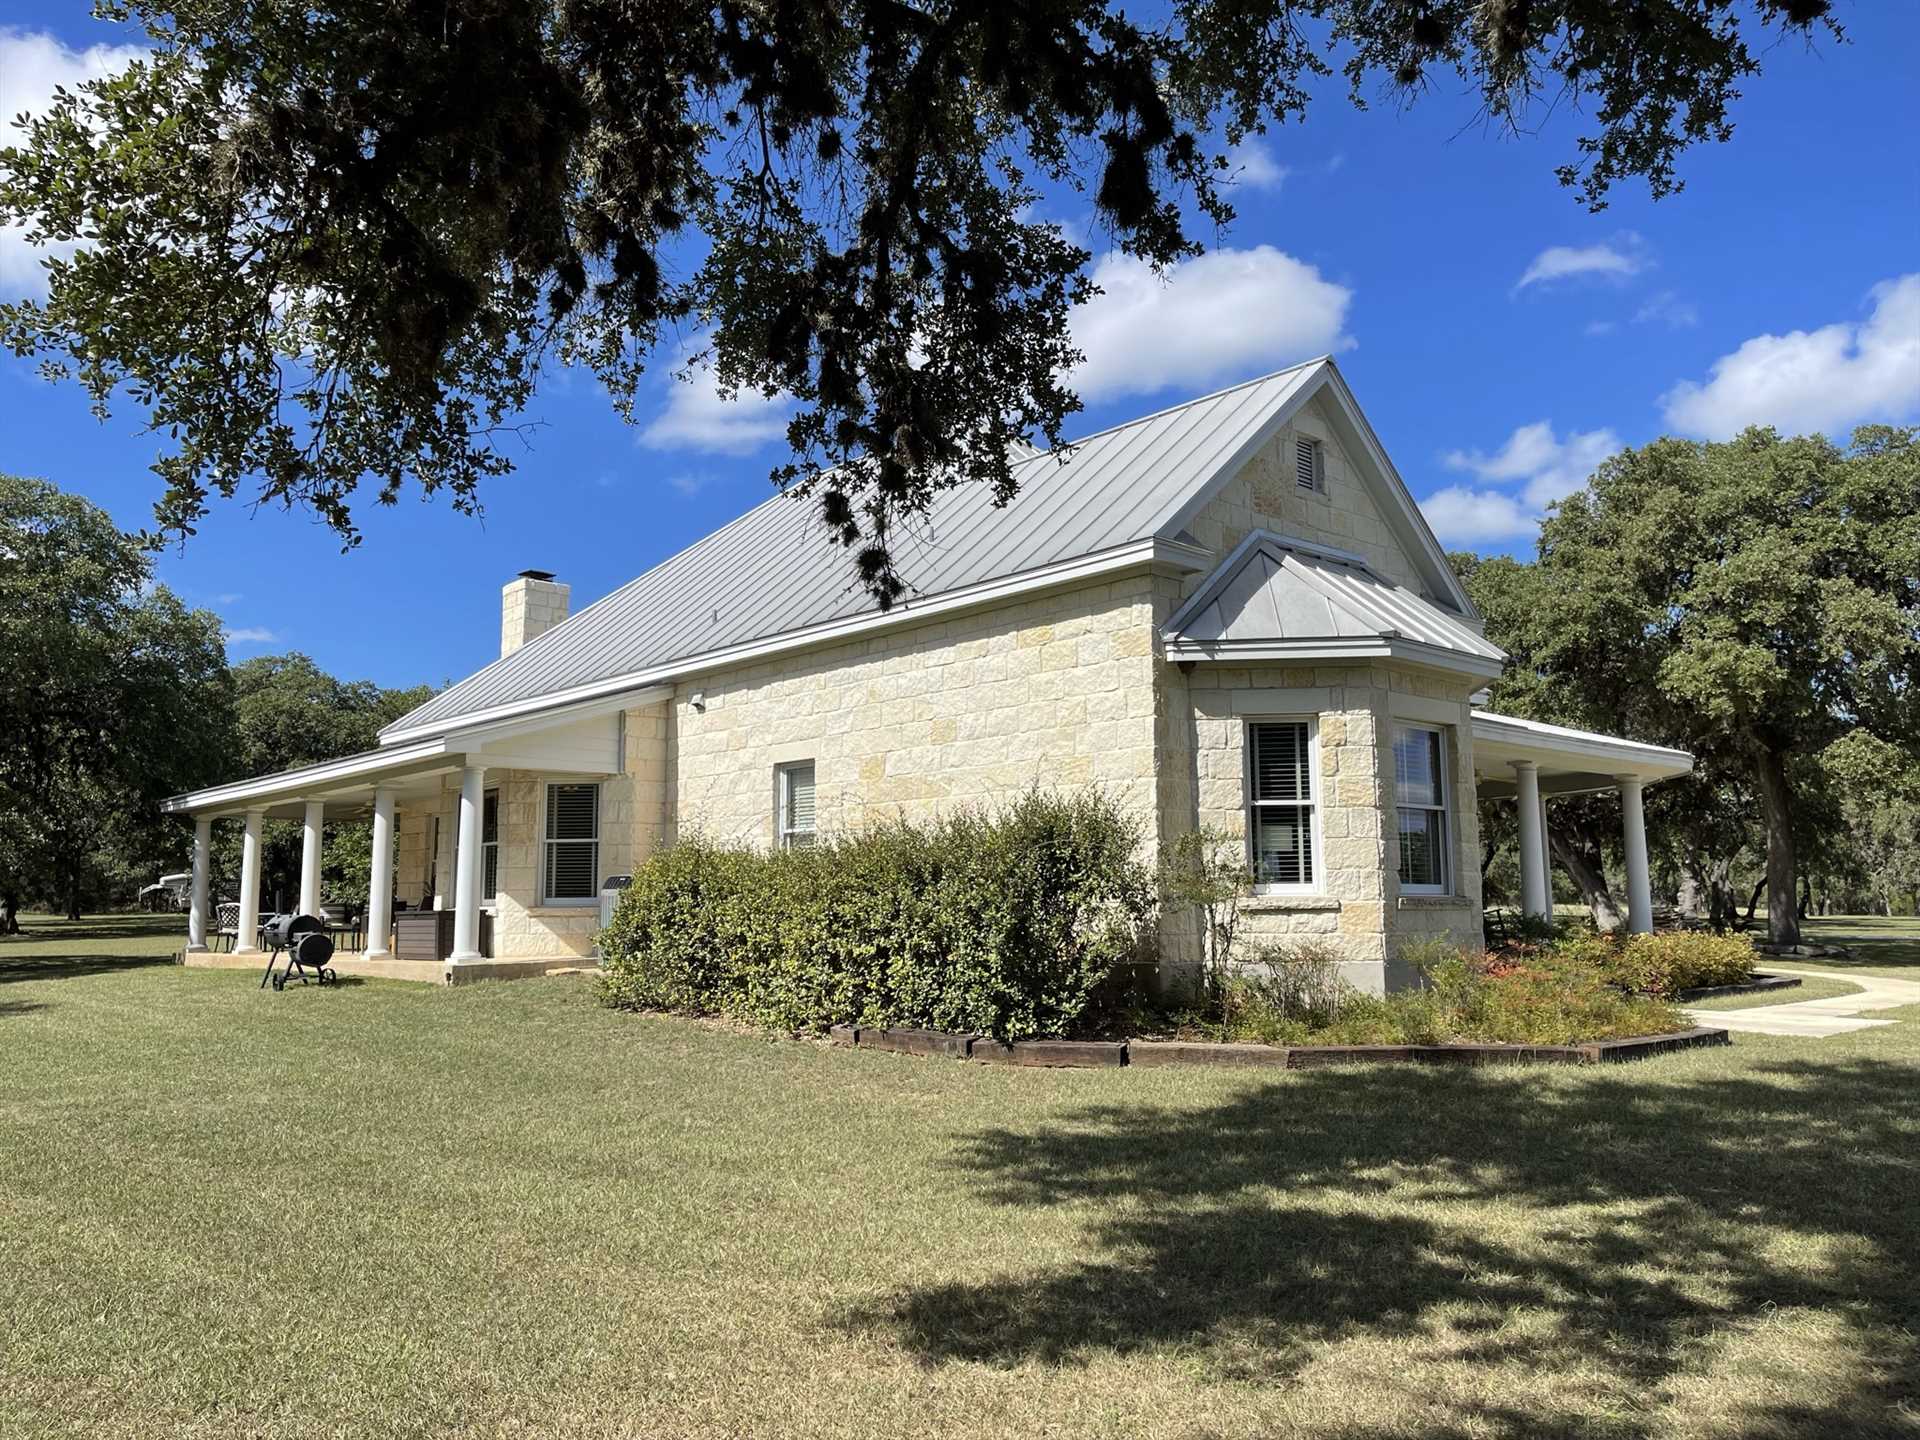                                                 Welcome to LaGaye Ranch, your Hill Country getaway! There's comfortable space here for up to eight guests.